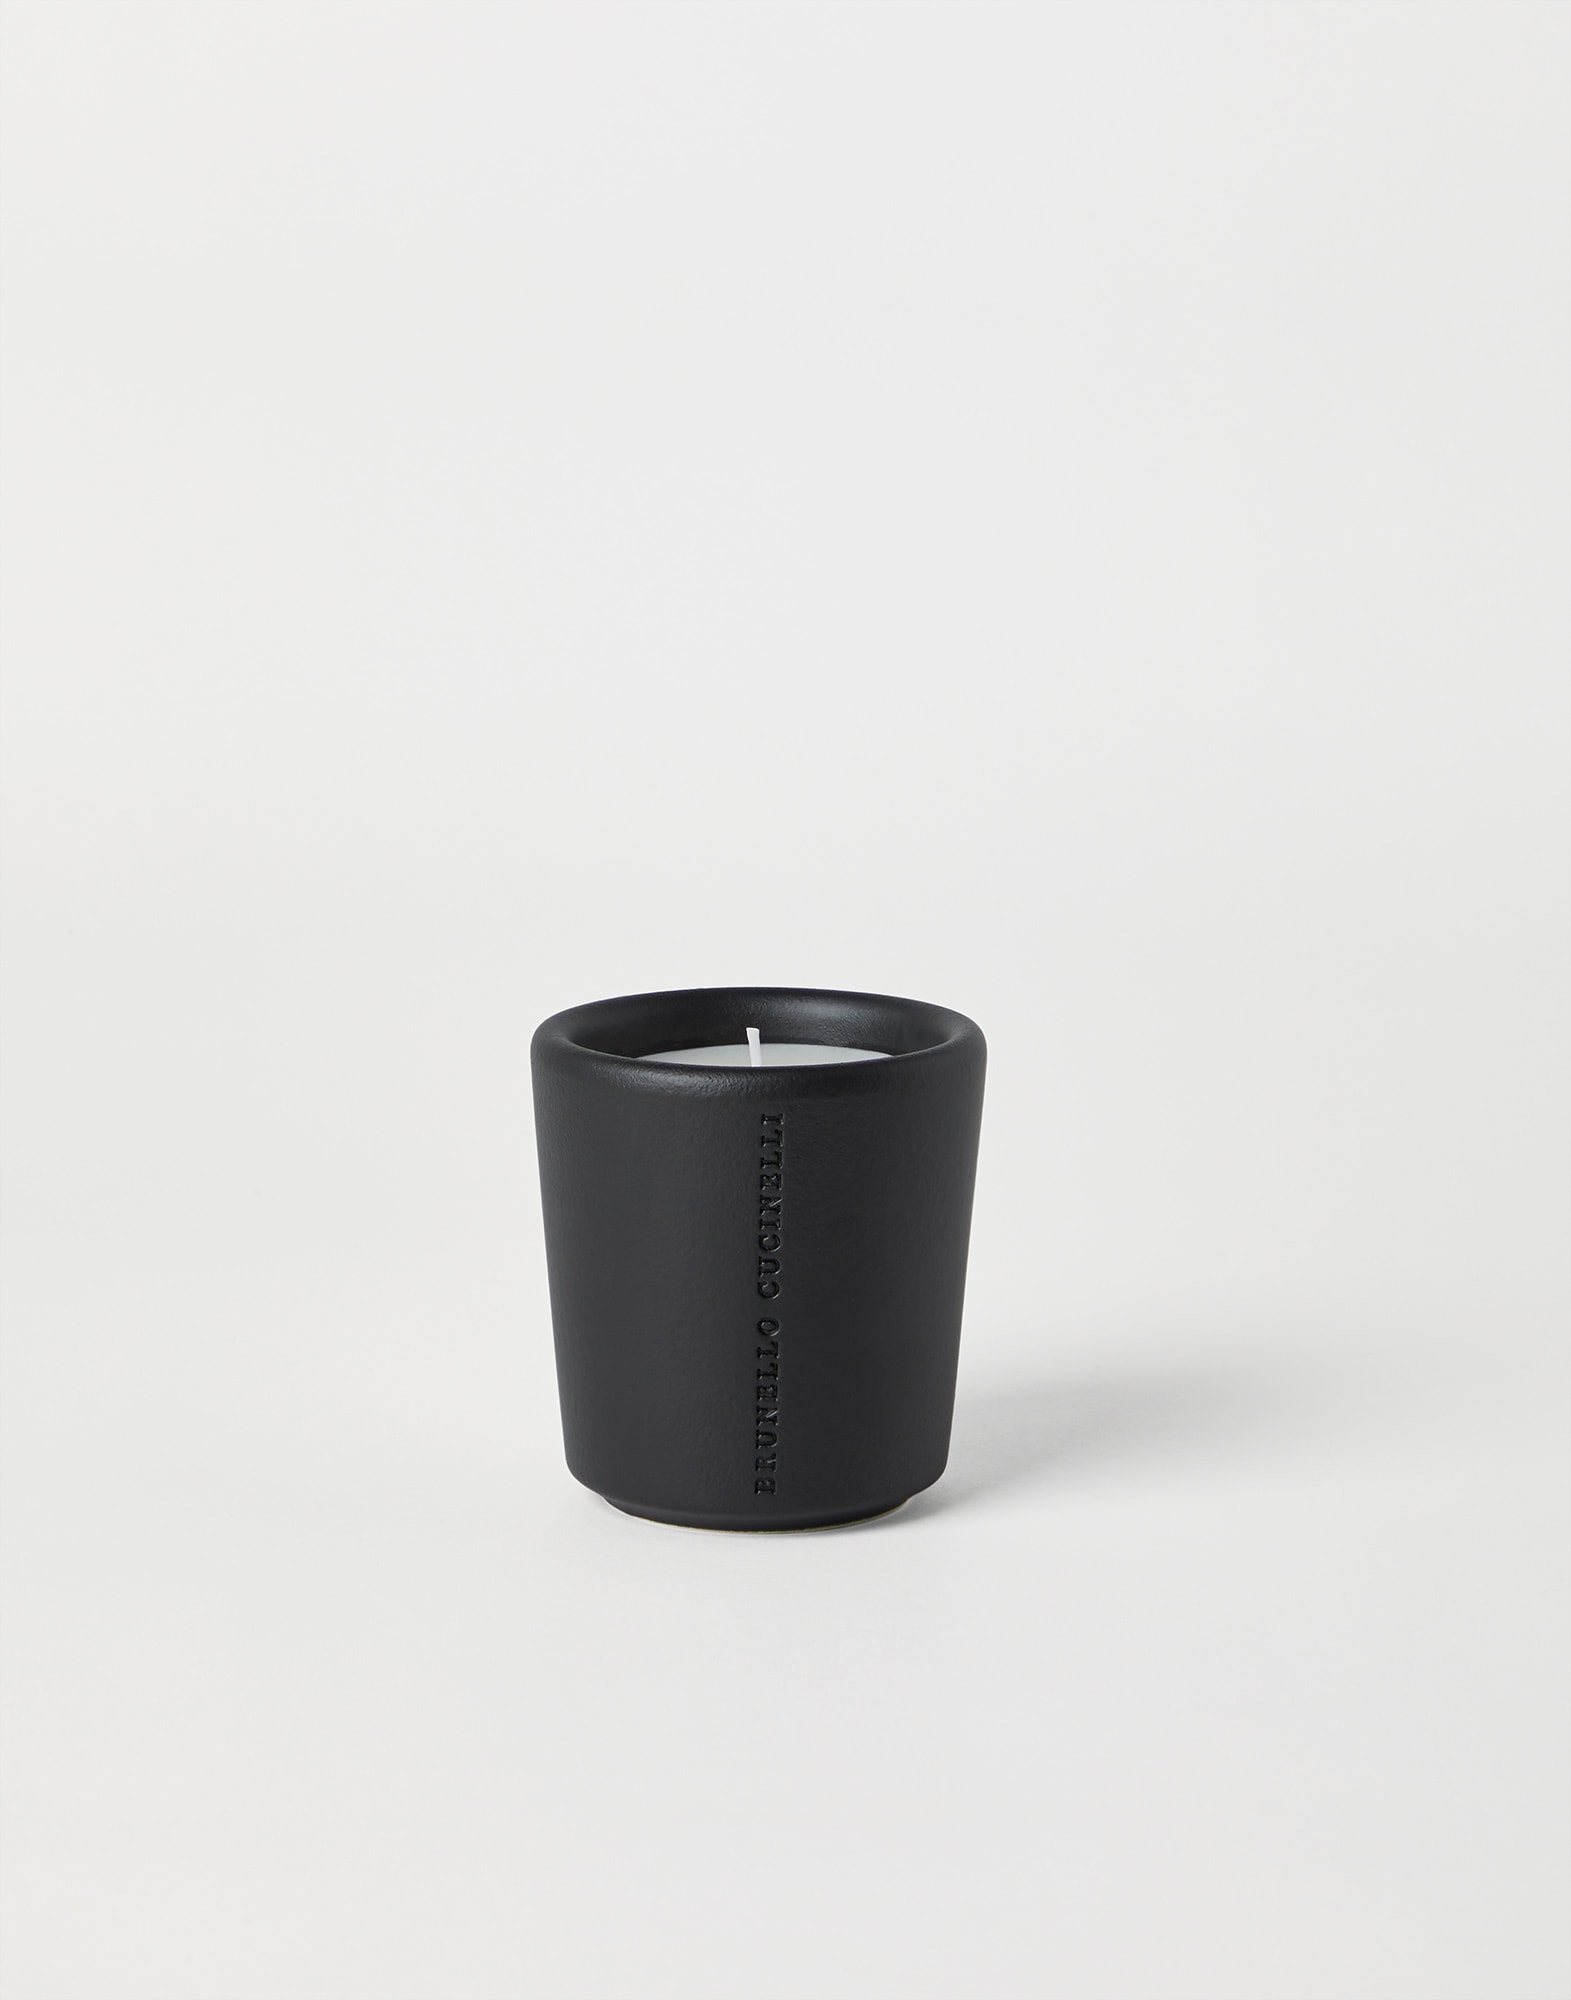 Candle in matte vessel